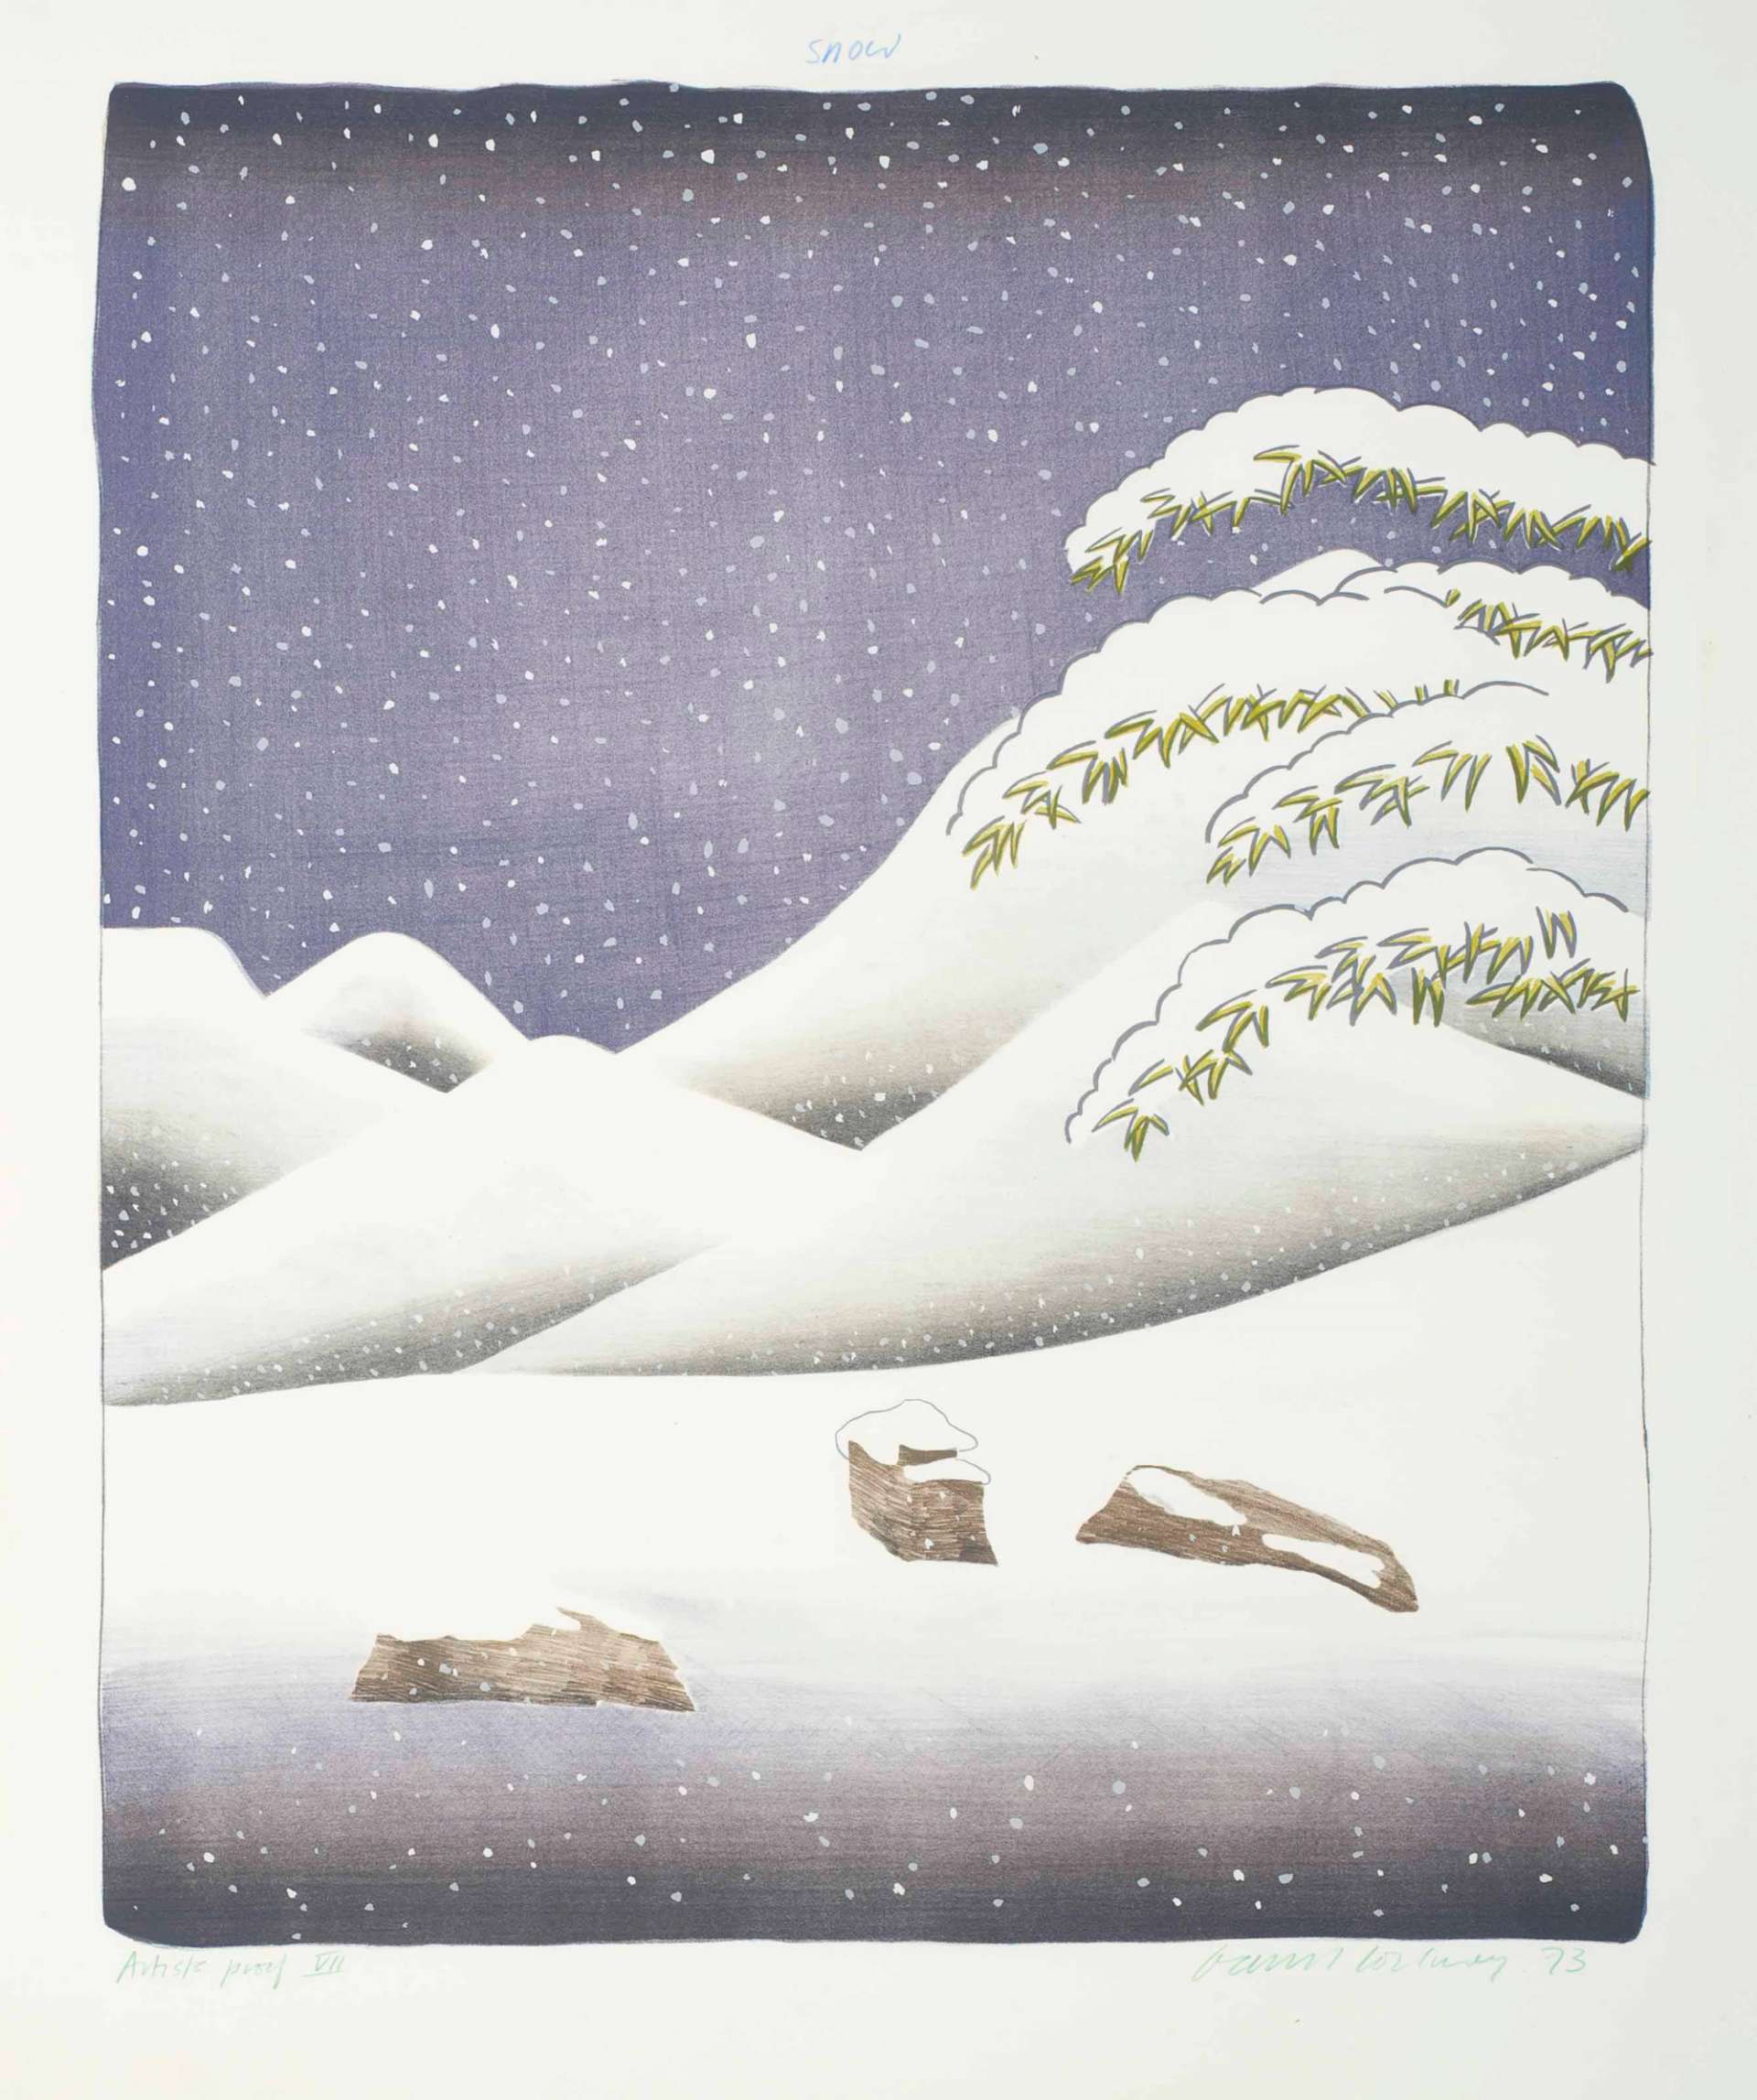 David Hockney's Snow. A landscape setting of snow in the style of Ukiyo-e. 